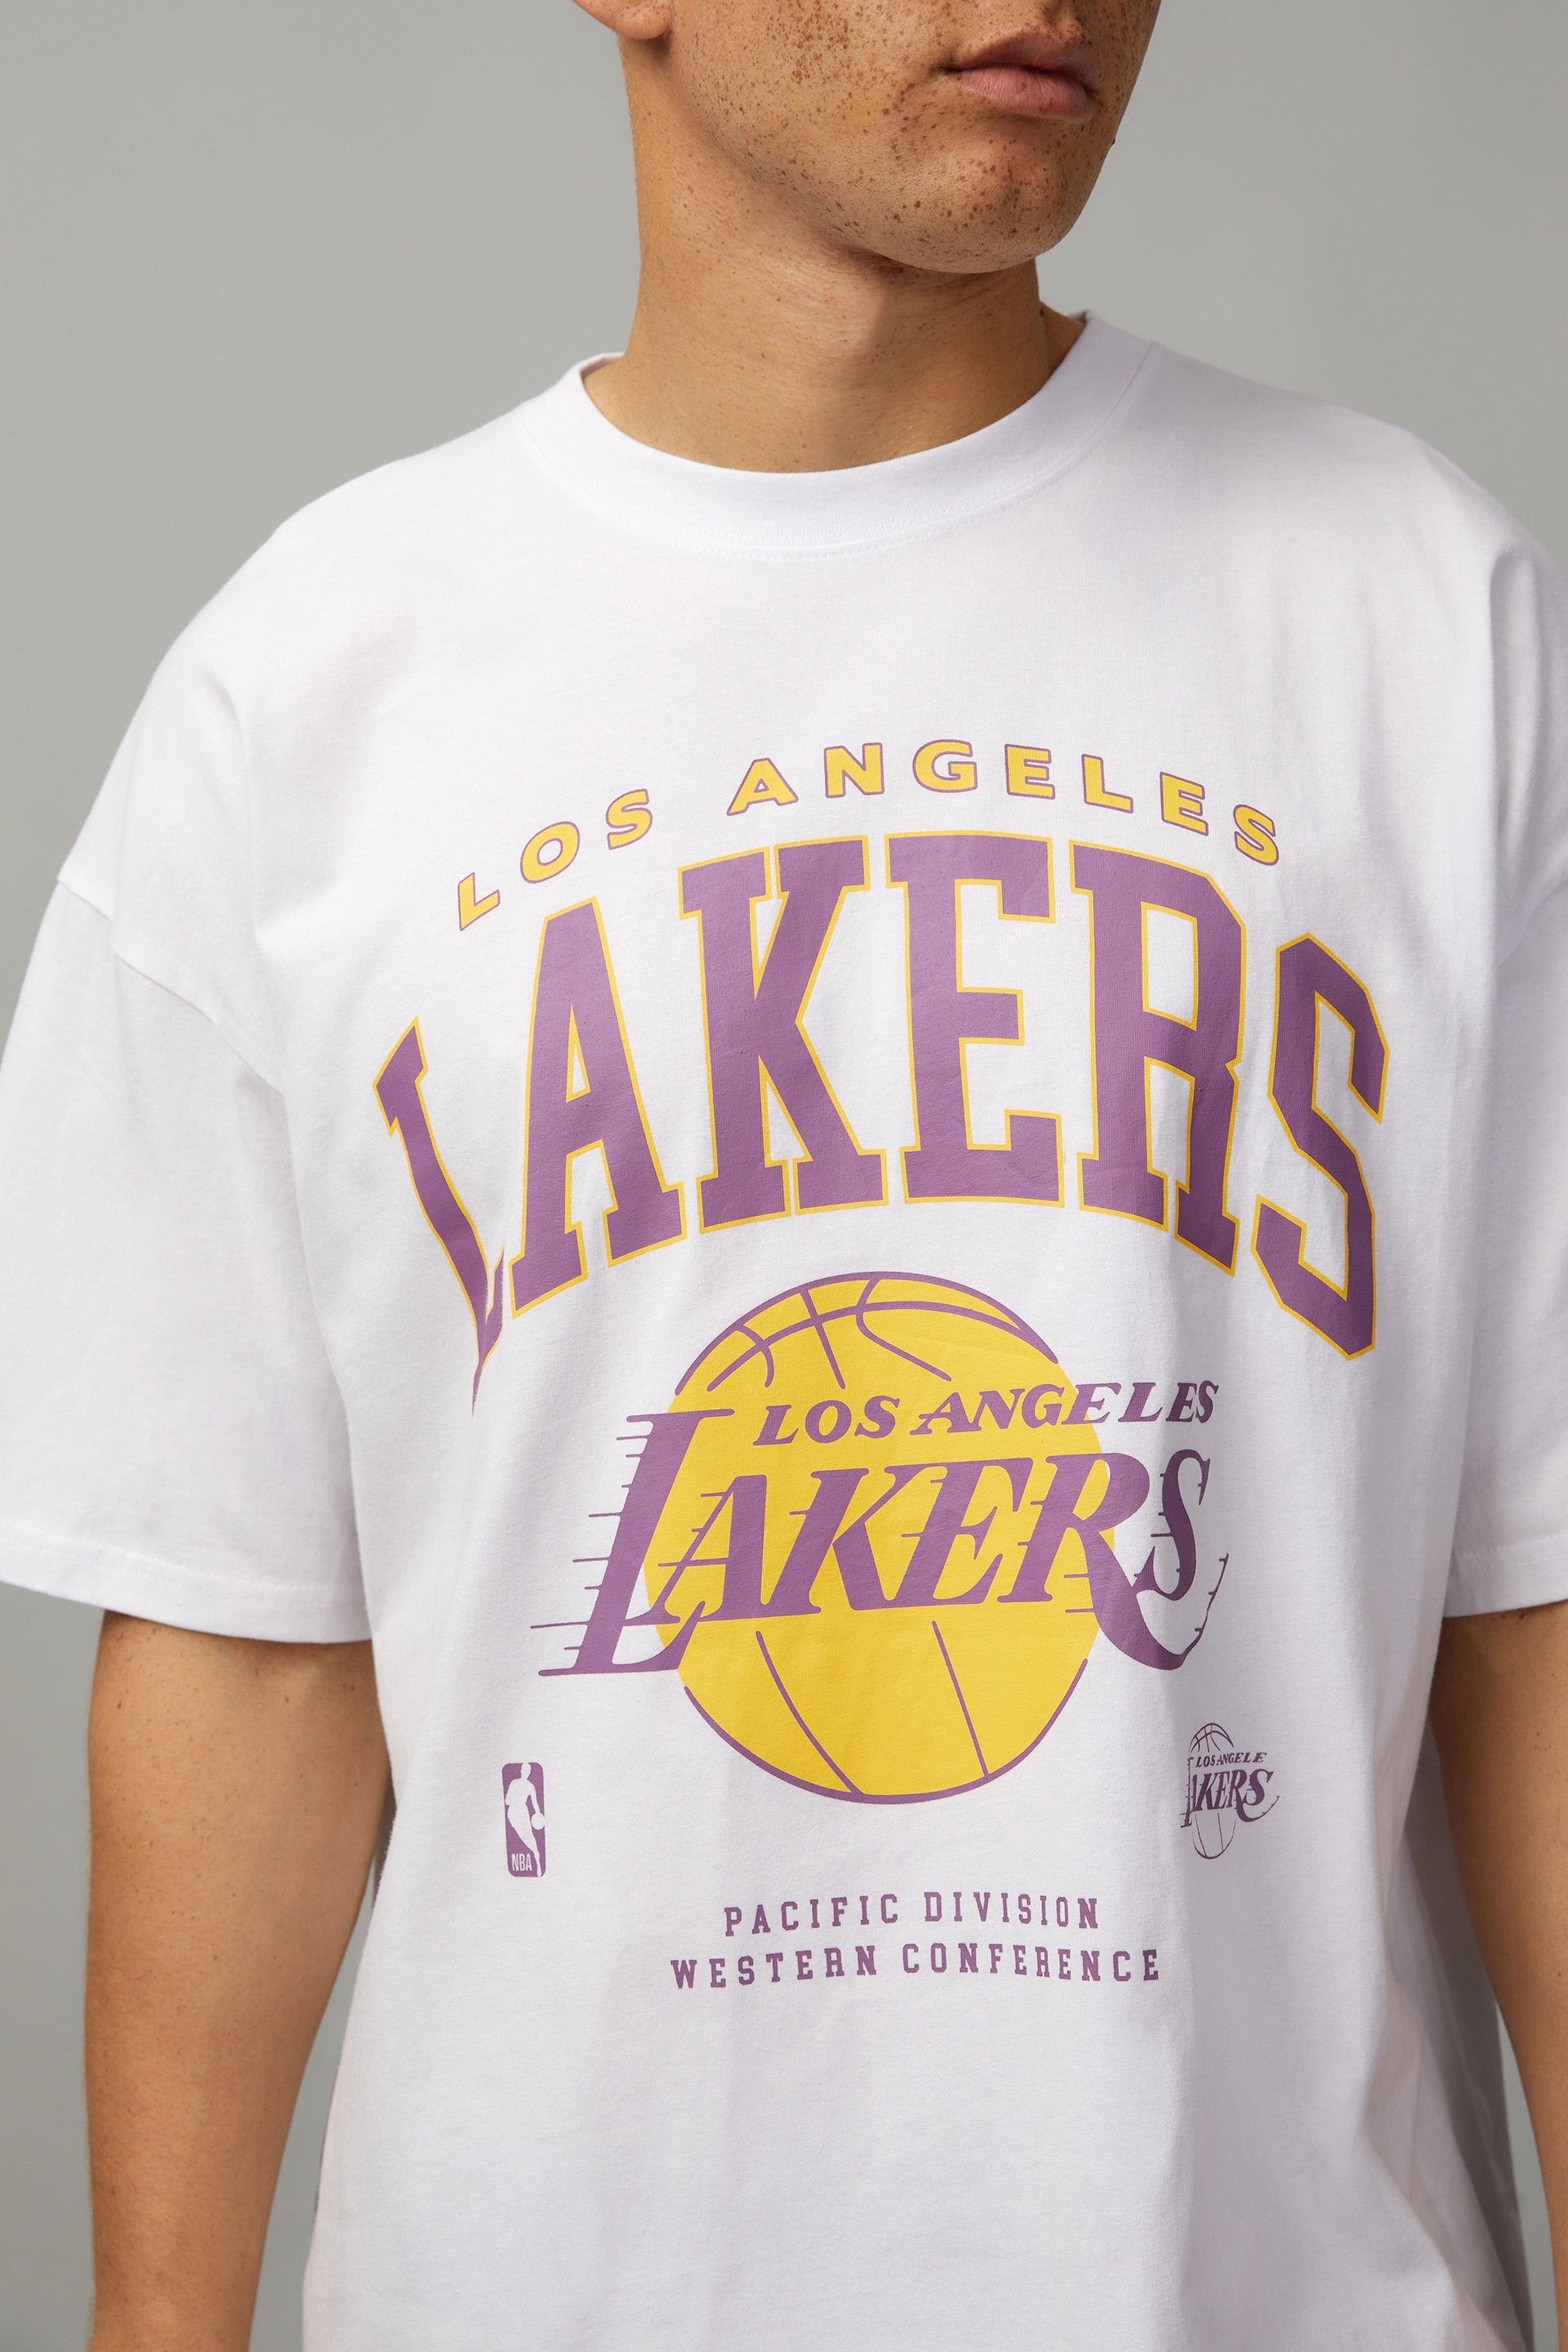 NBA Los Angeles Lakers Pacific Division Western Conference T-shirt Size  Large